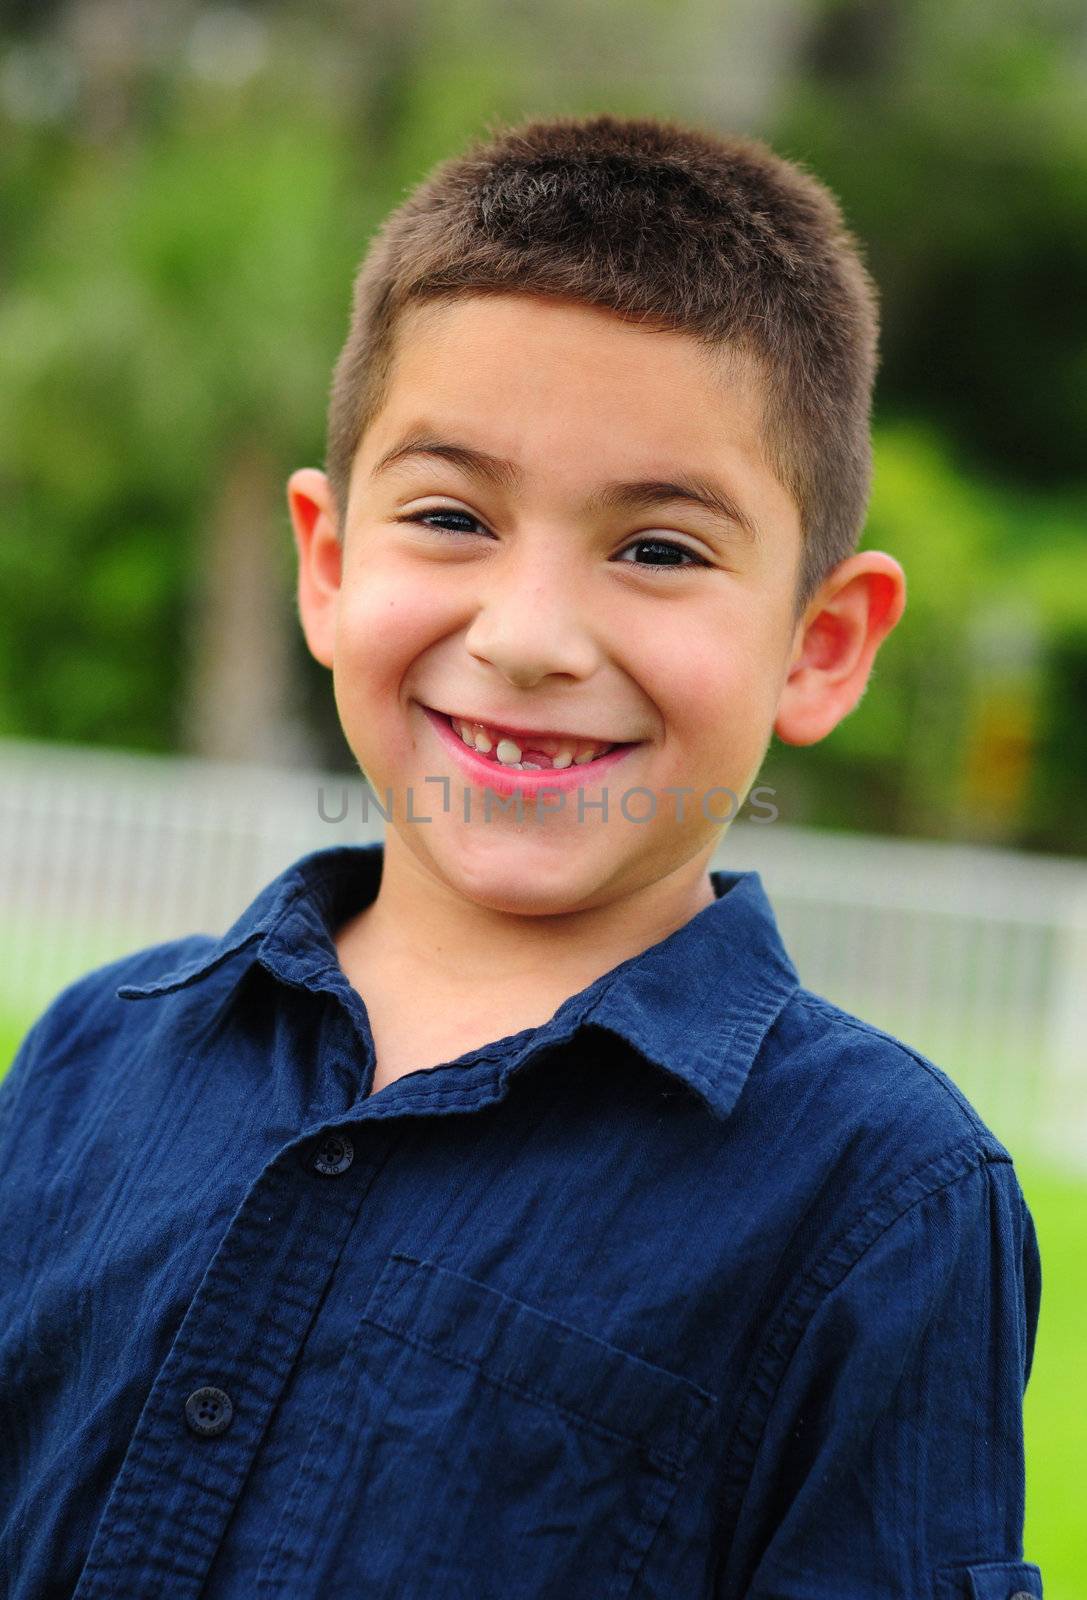 Smiling young hispanic child with missing tooth